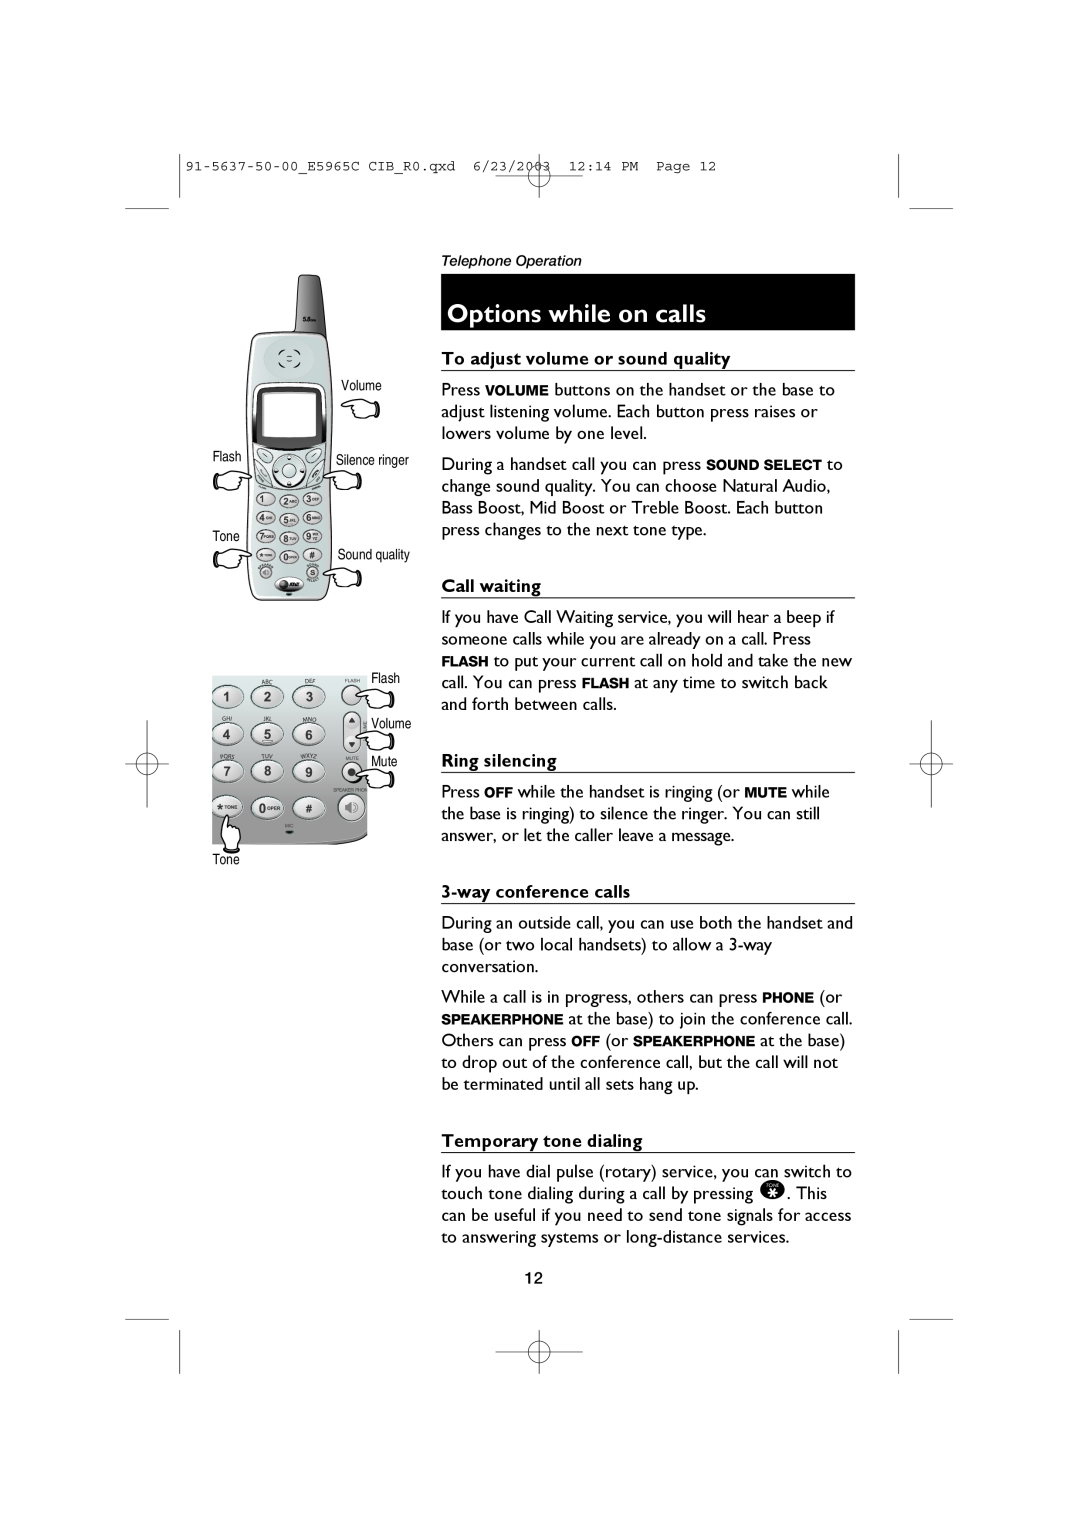 AT&T AT&T E5965C user manual Options while on calls, To adjust volume or sound quality, Call waiting, Ring silencing 